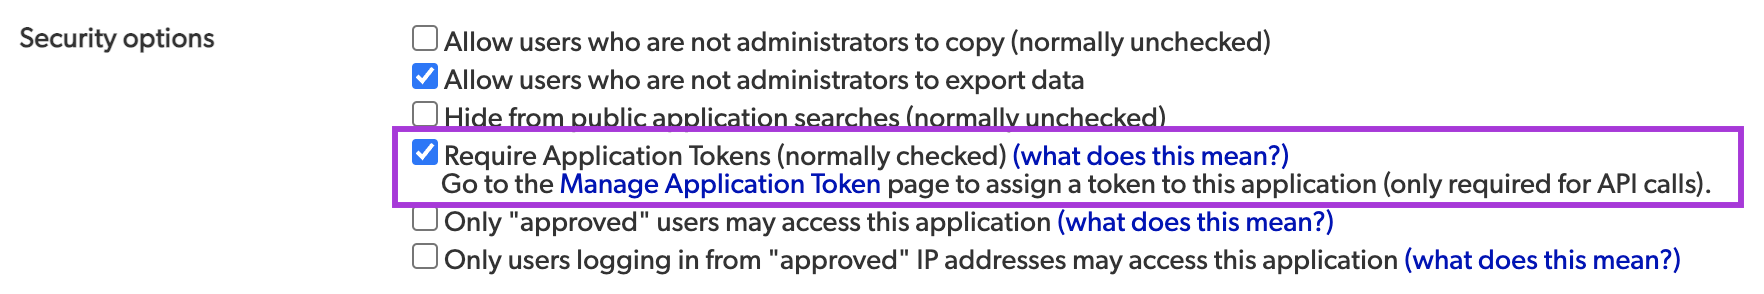 advanced settings, list of checkbox options in Security options. Require application Tokens checkbox is highlighted.